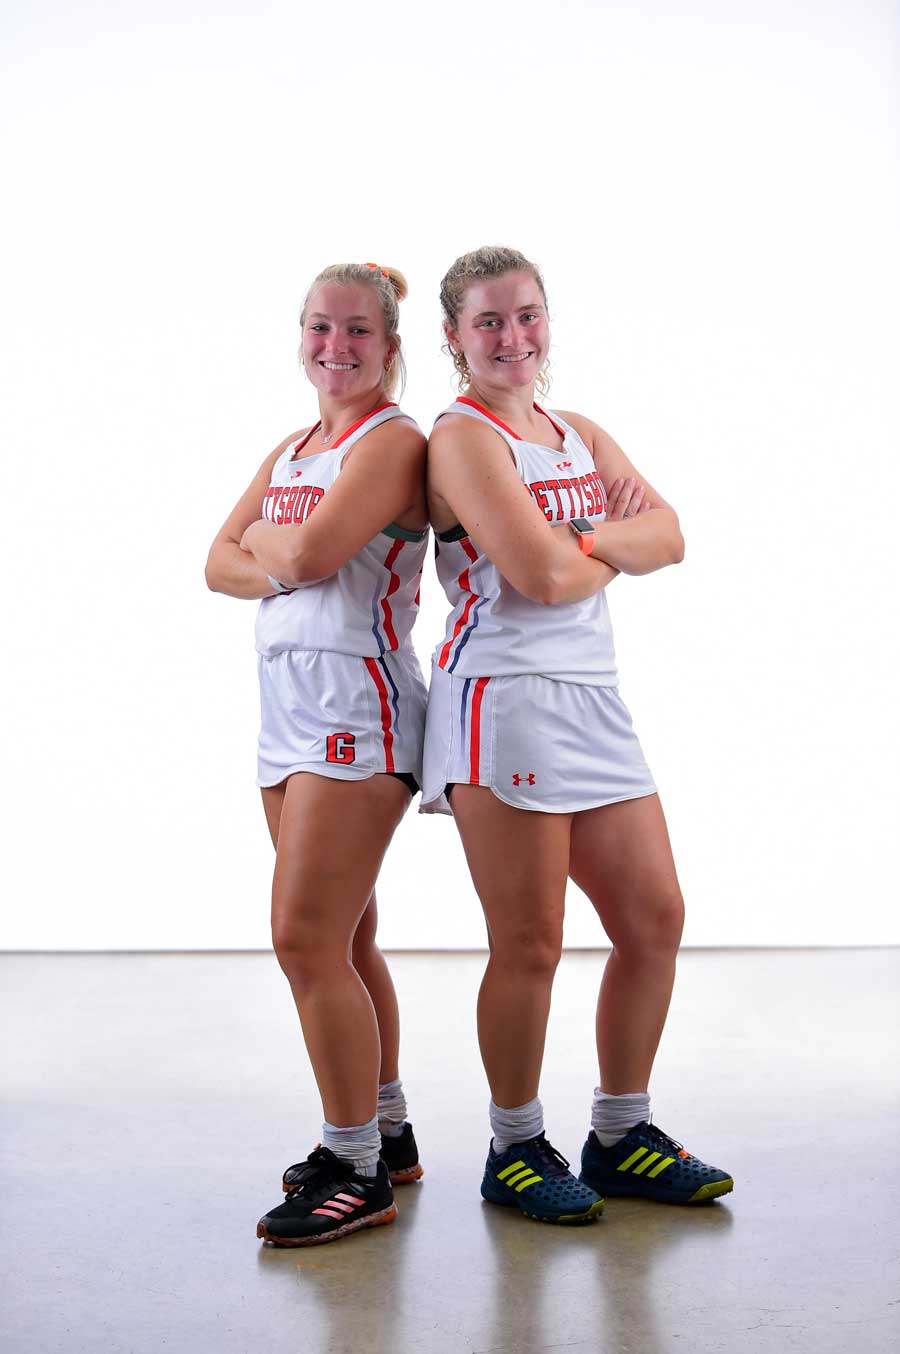 Charlotte and Greta Lacey wearing their Lacrosse uniforms